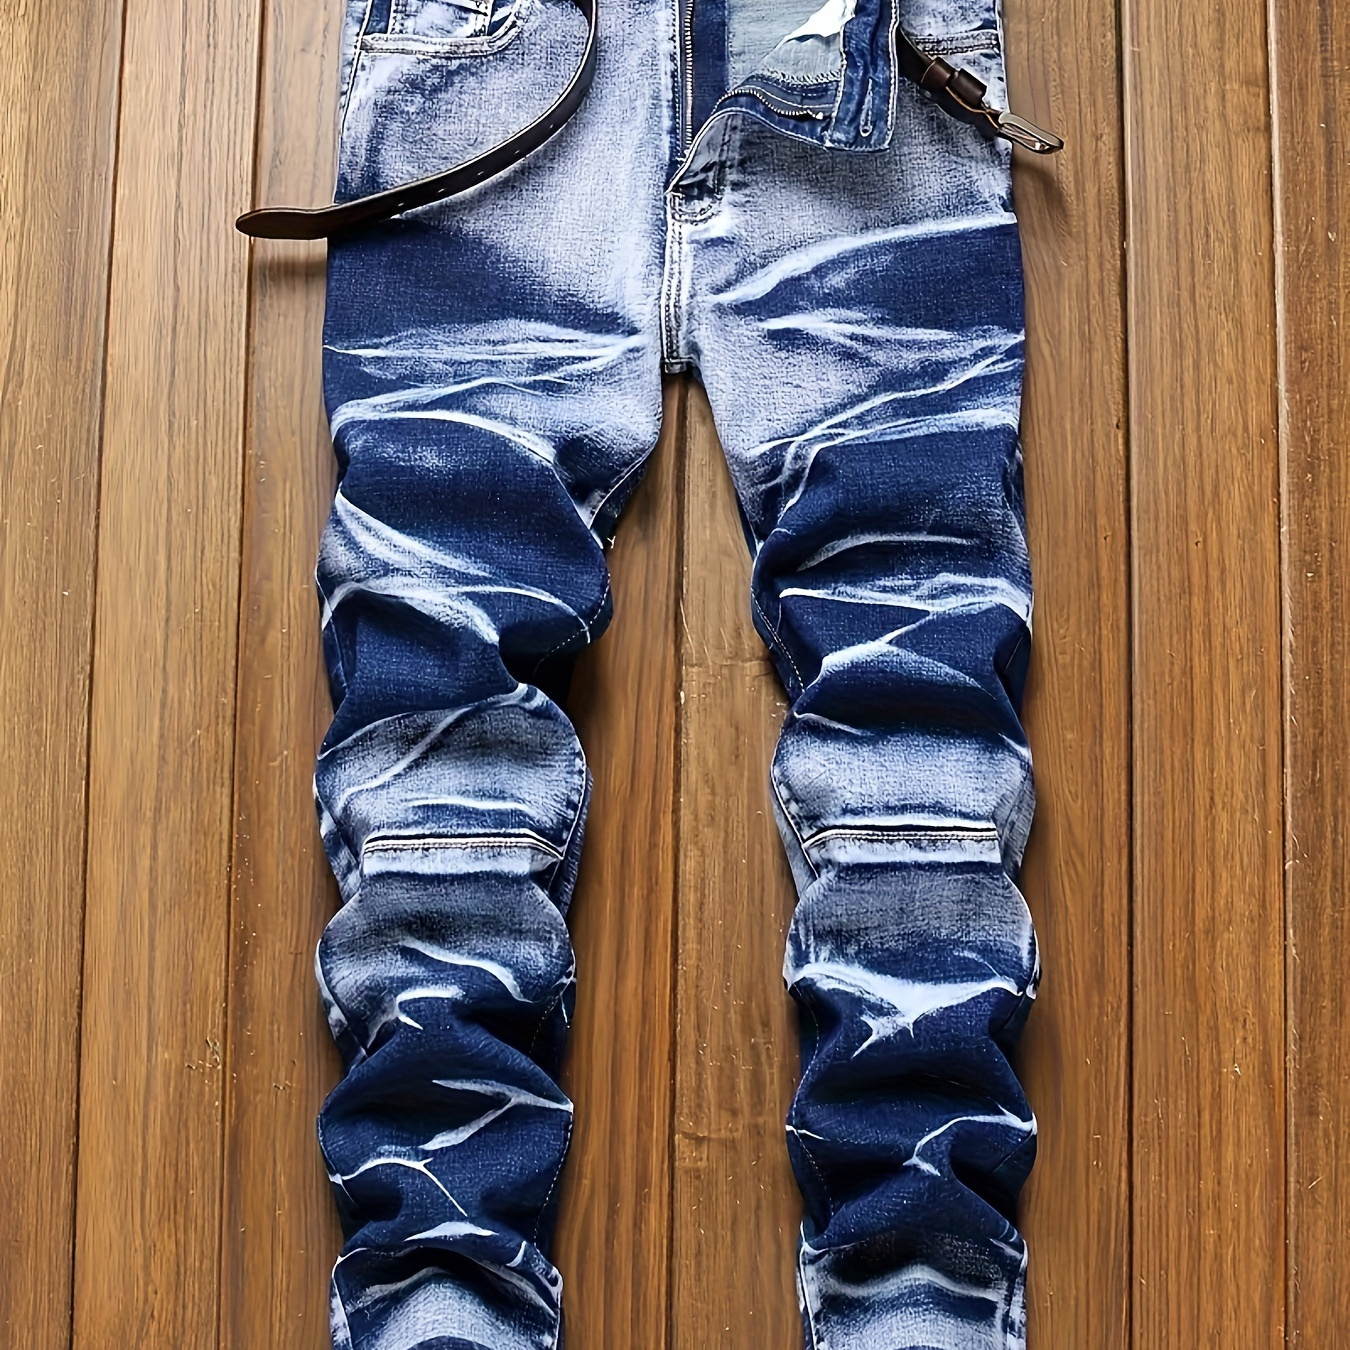 

Men's Tie-dye Style Cotton Blend Slim Fit And Cuffed Denim Jeans With Distressed Pieces, Chic And Trendy Jeans For All Seasons Street Leisurewear